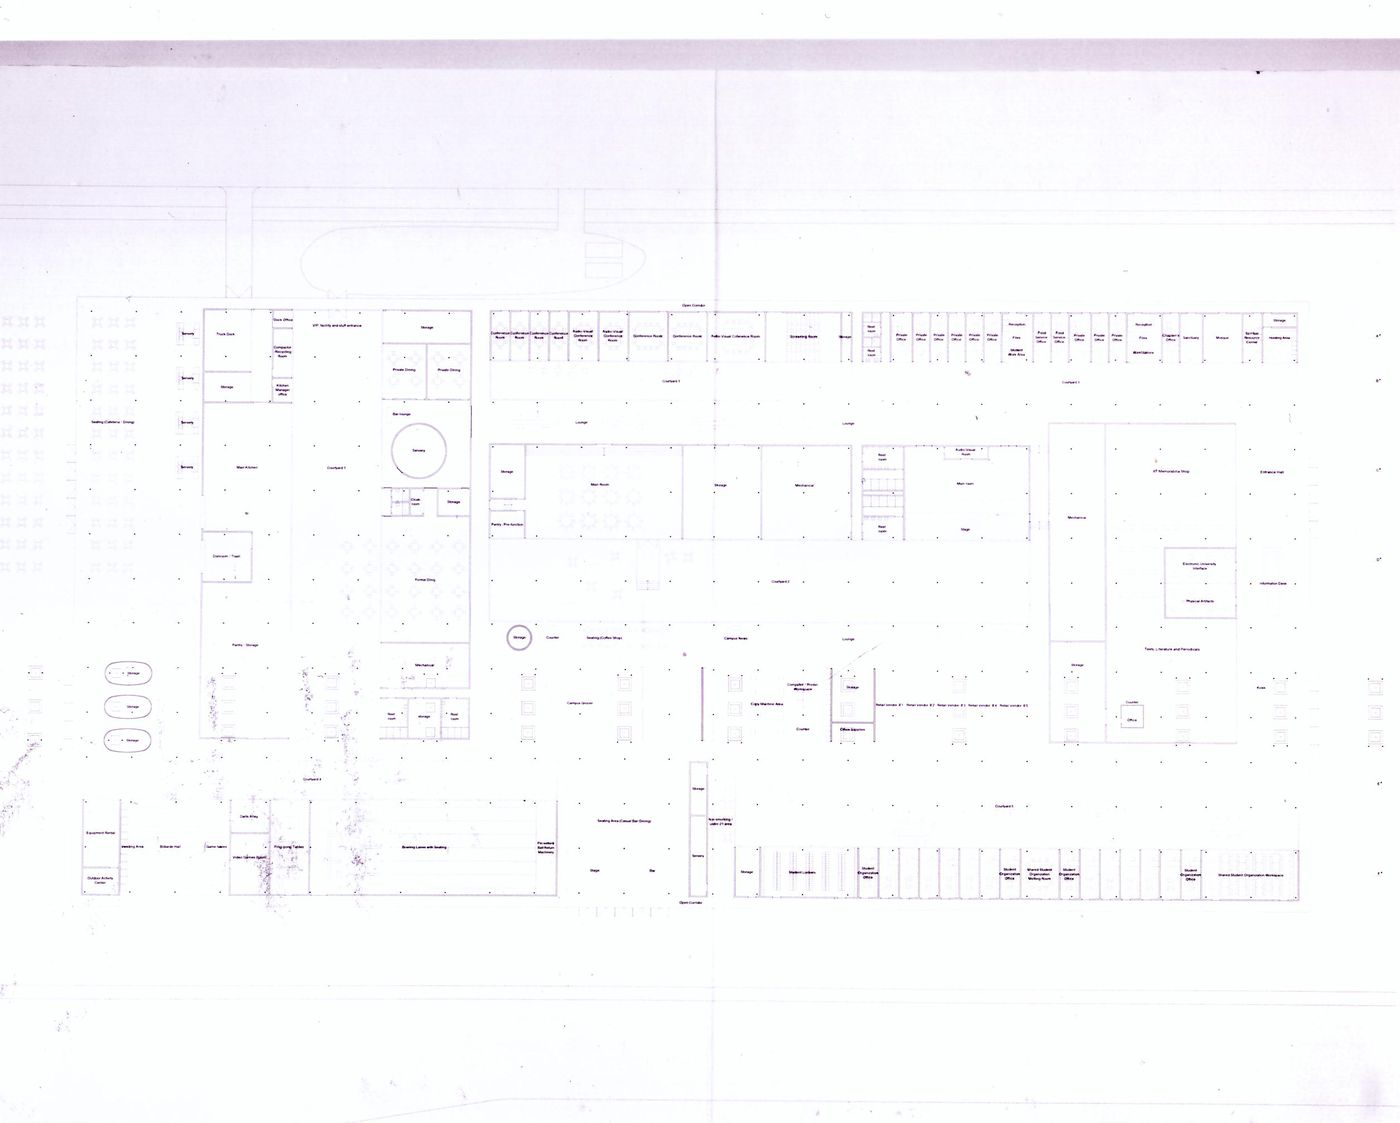 Ground floor plan, submission to the Richard H. Driehaus Foundation International Design Competition for a new campus center (1997-98), Illinois Institute of Technology, Chicago, Illinois